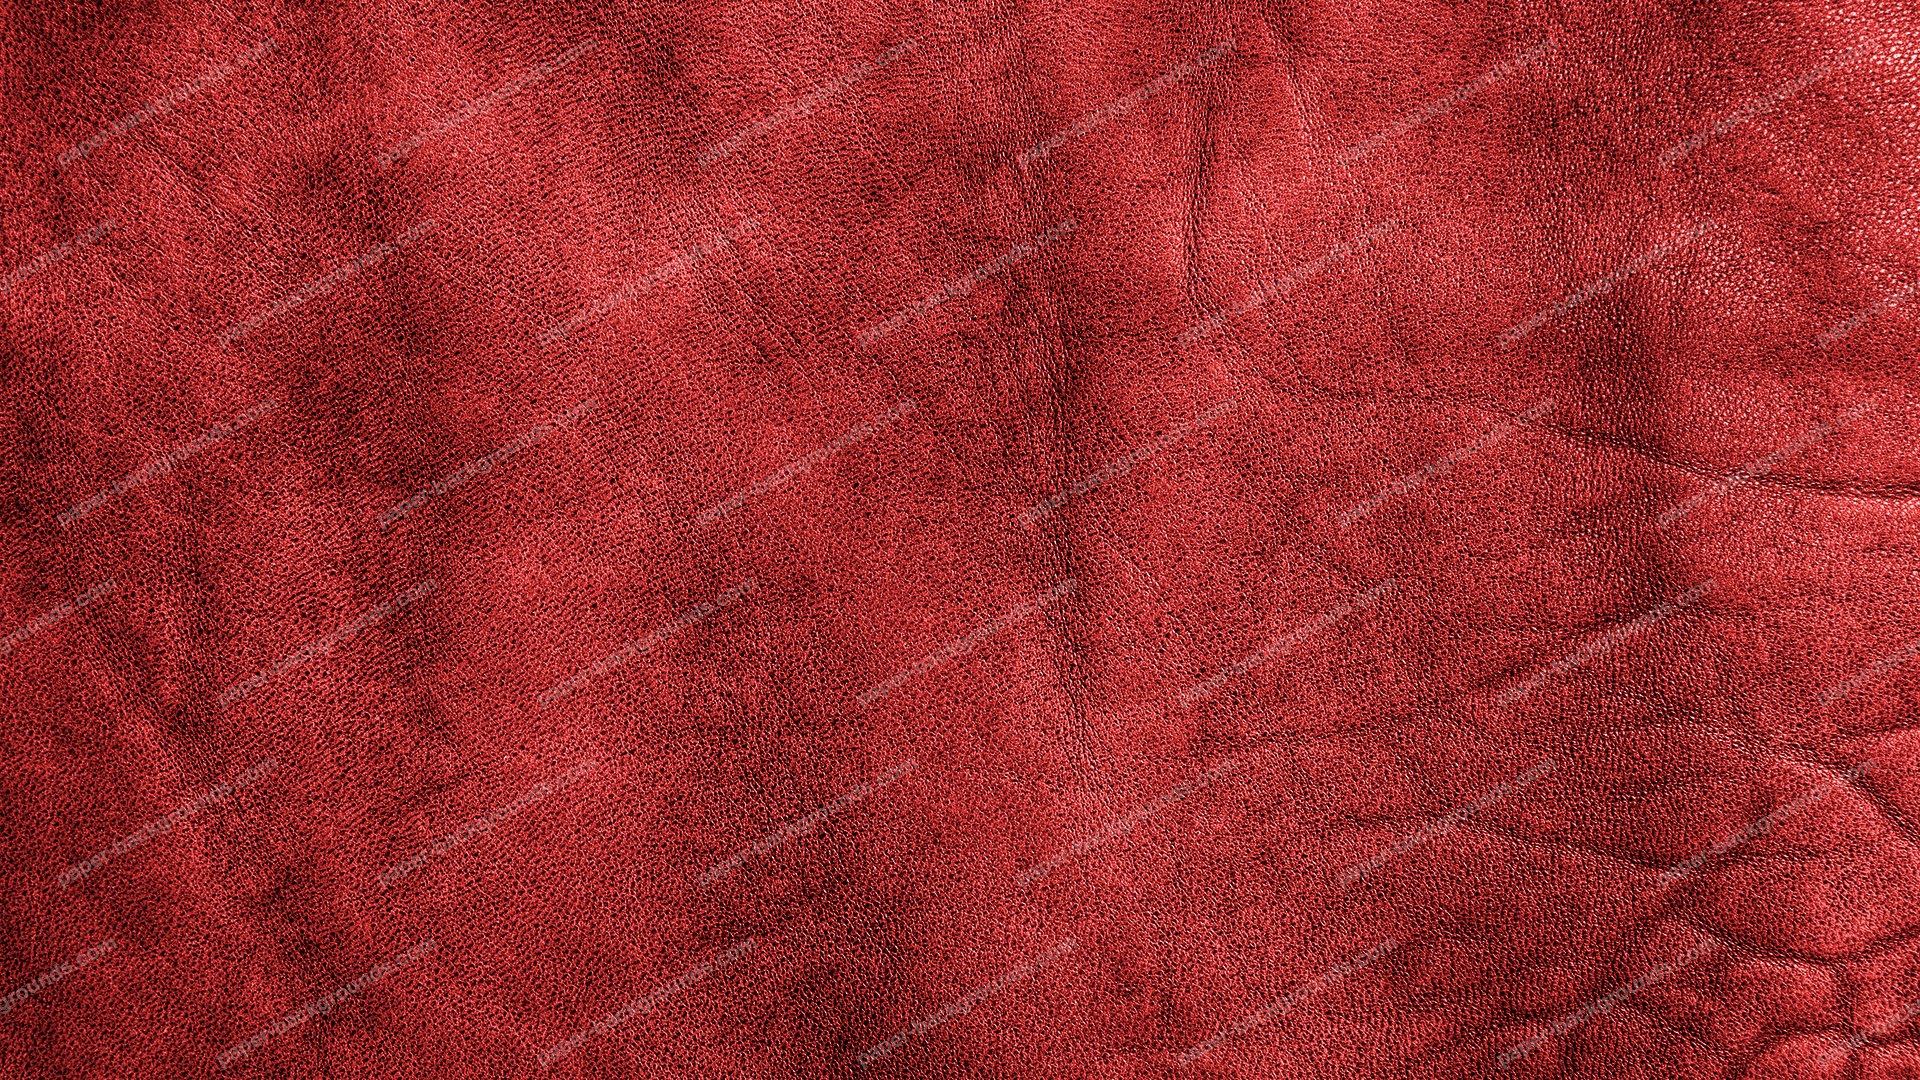 Red Vintage Leather Texture HD X 1080p